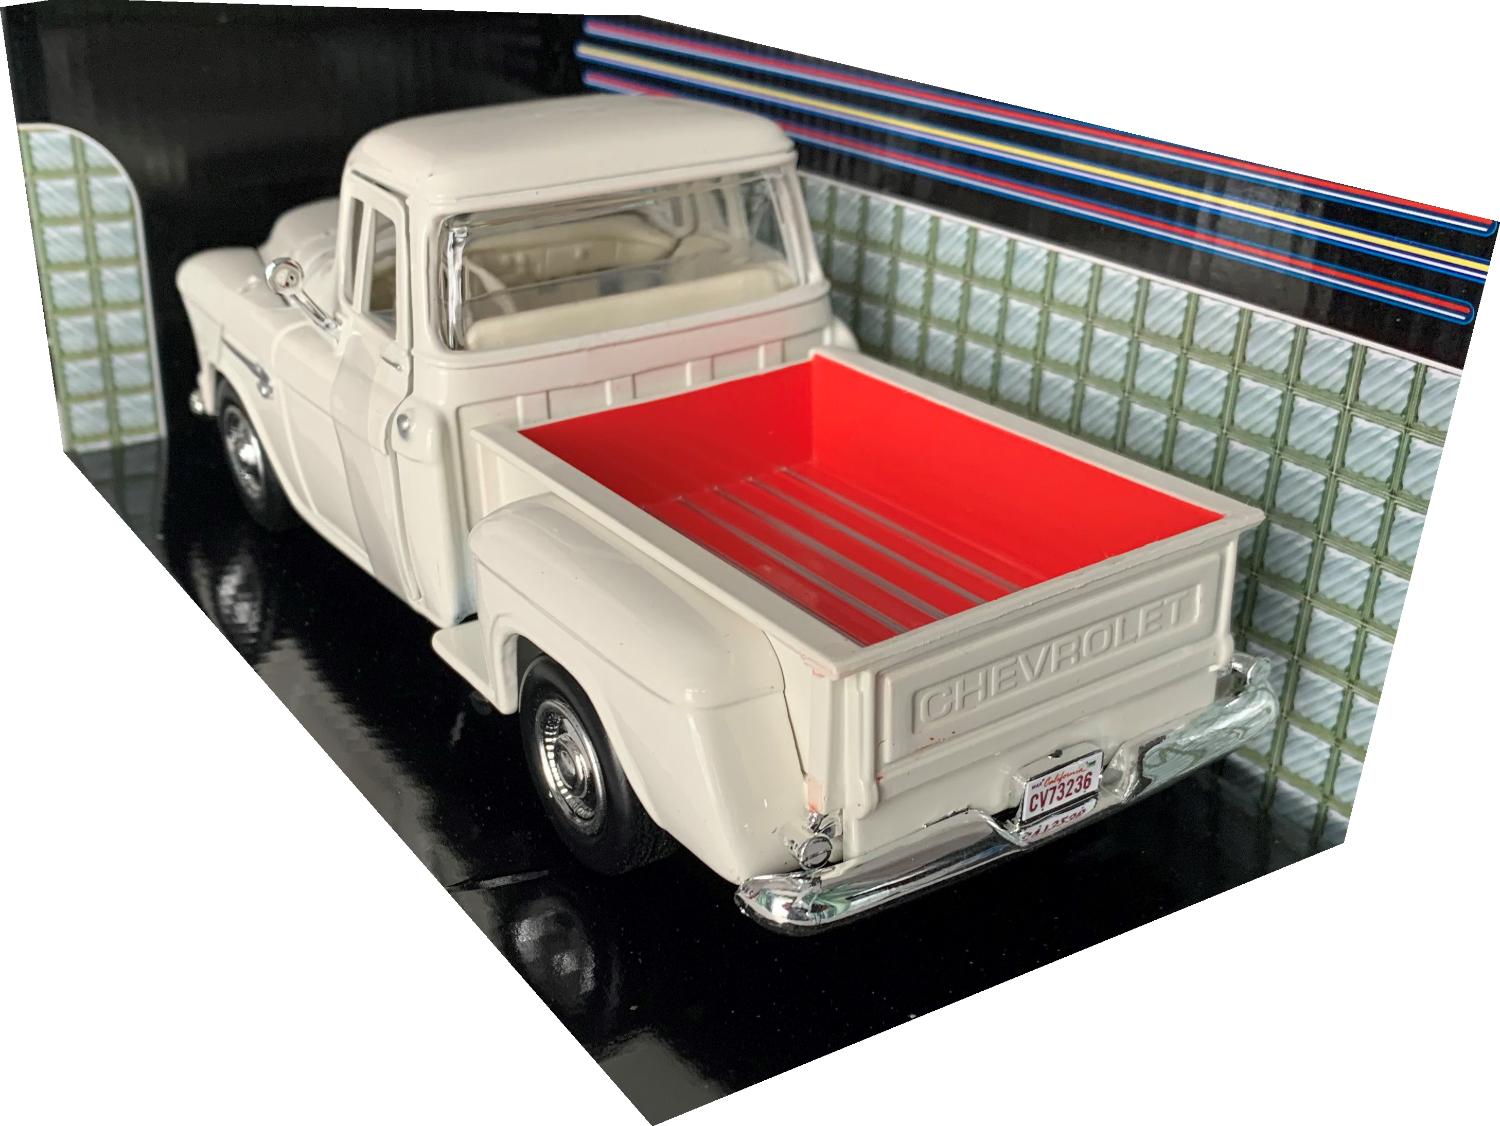 A good production of the Chevy 5100 Stepside Pickup Truck with detail throughout, all authentically recreated.